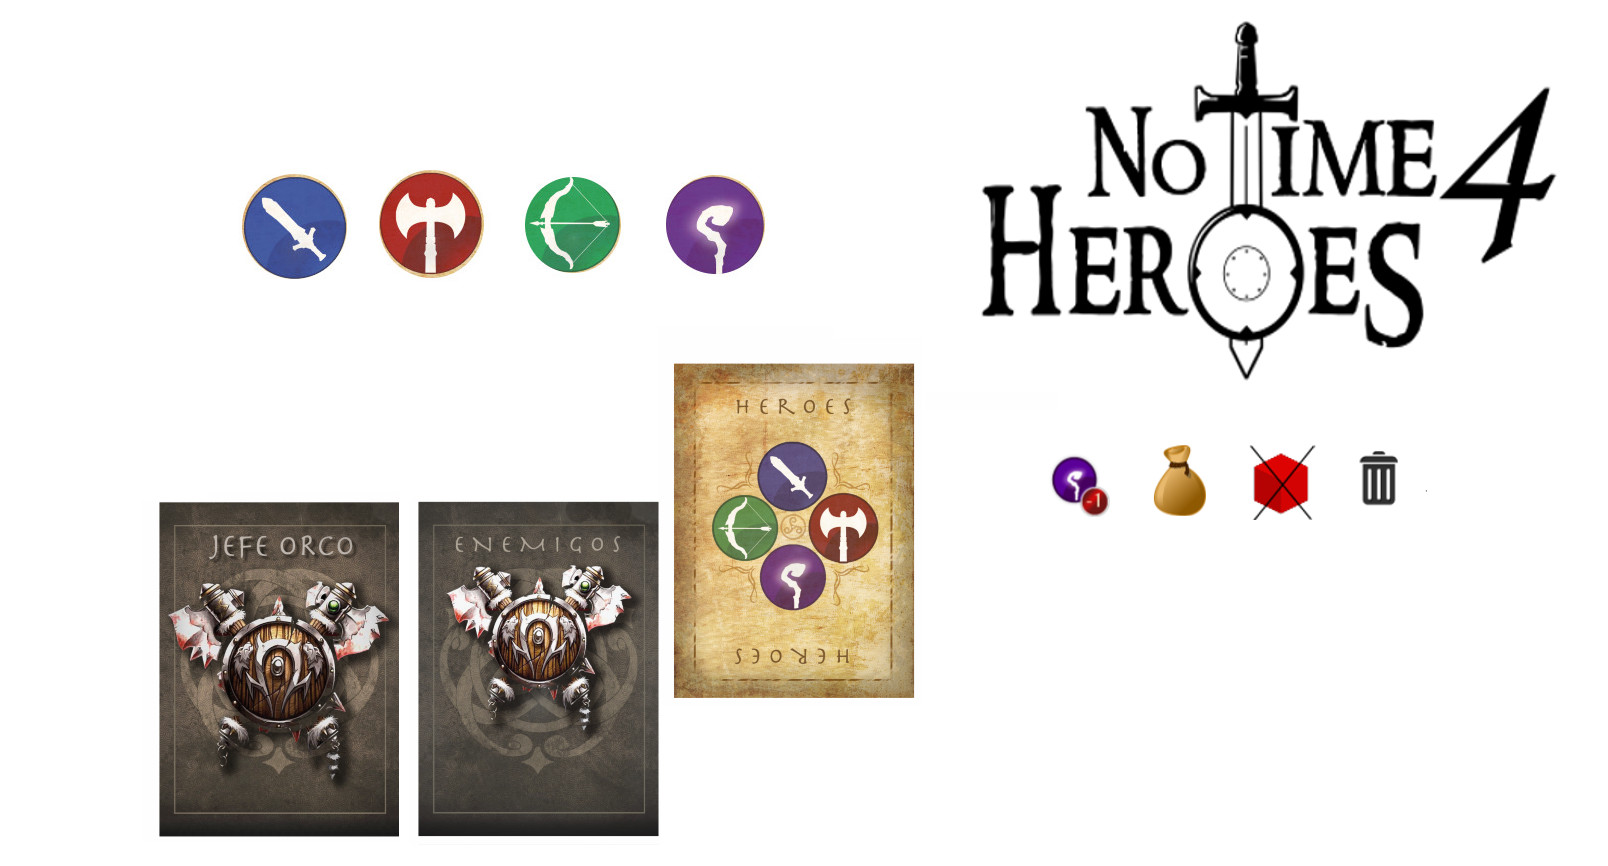 No Time For Heroes print and play